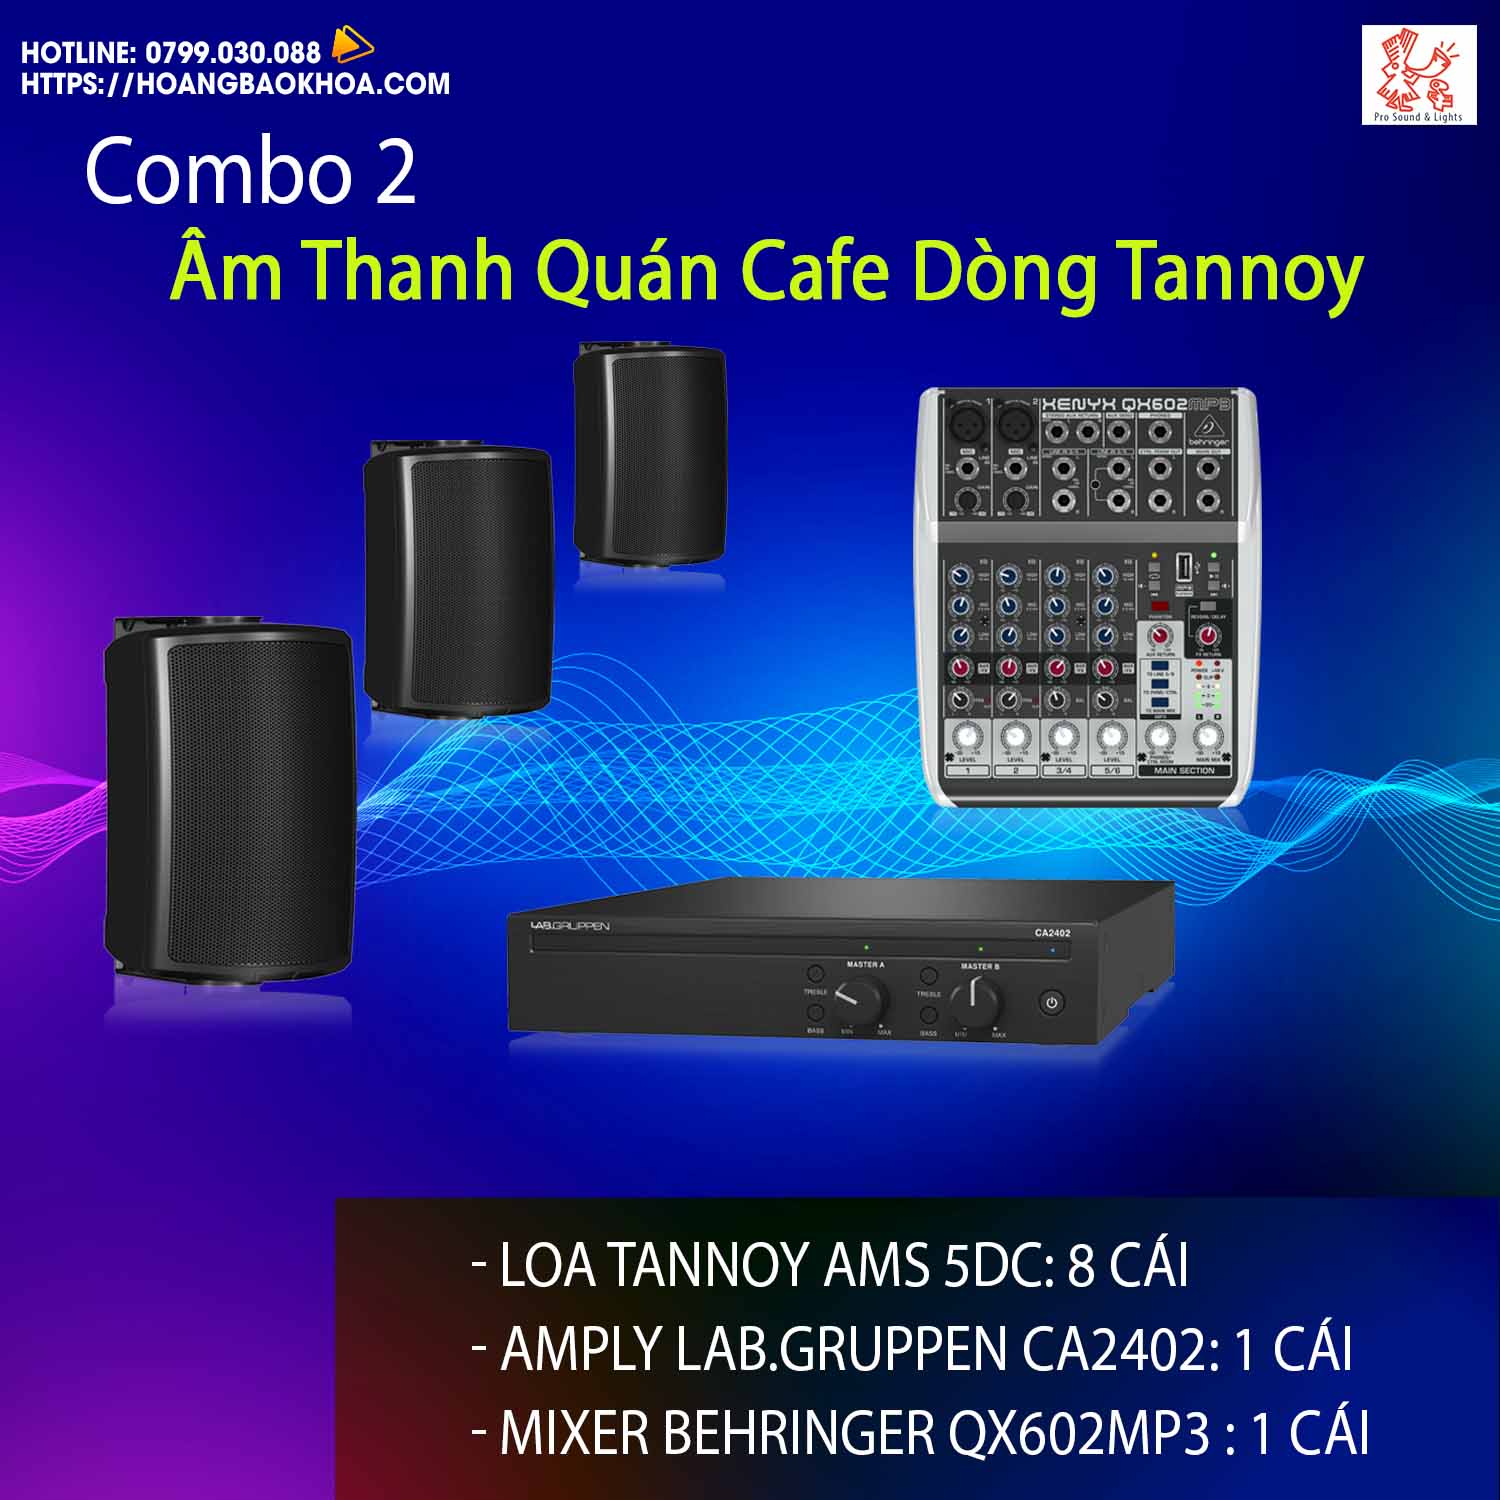 Coffee shops Sound system Tannoy Combo 2